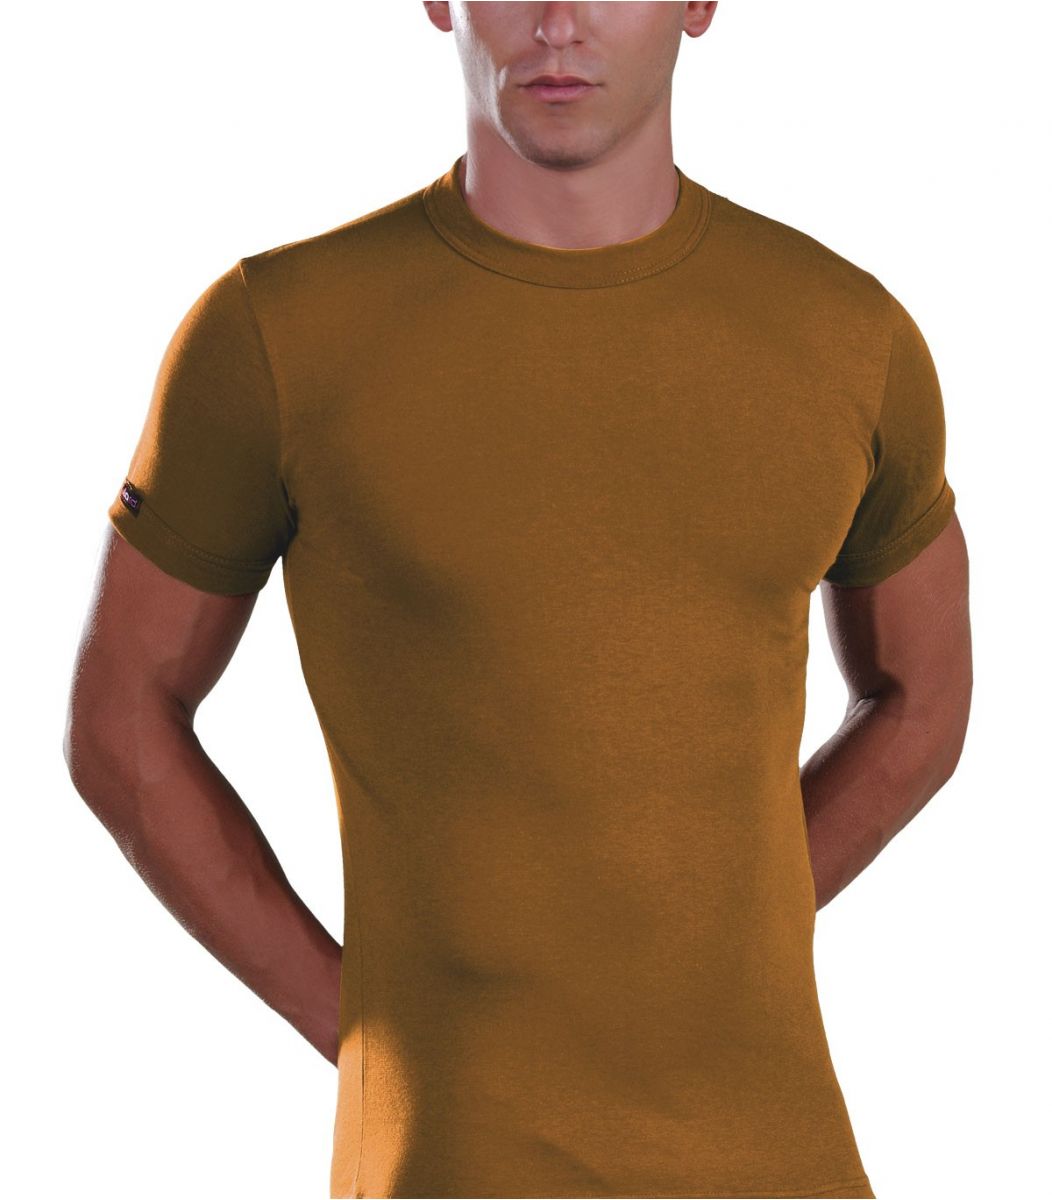  Crew neck Lord Offers T-shirt Viscose 380-5